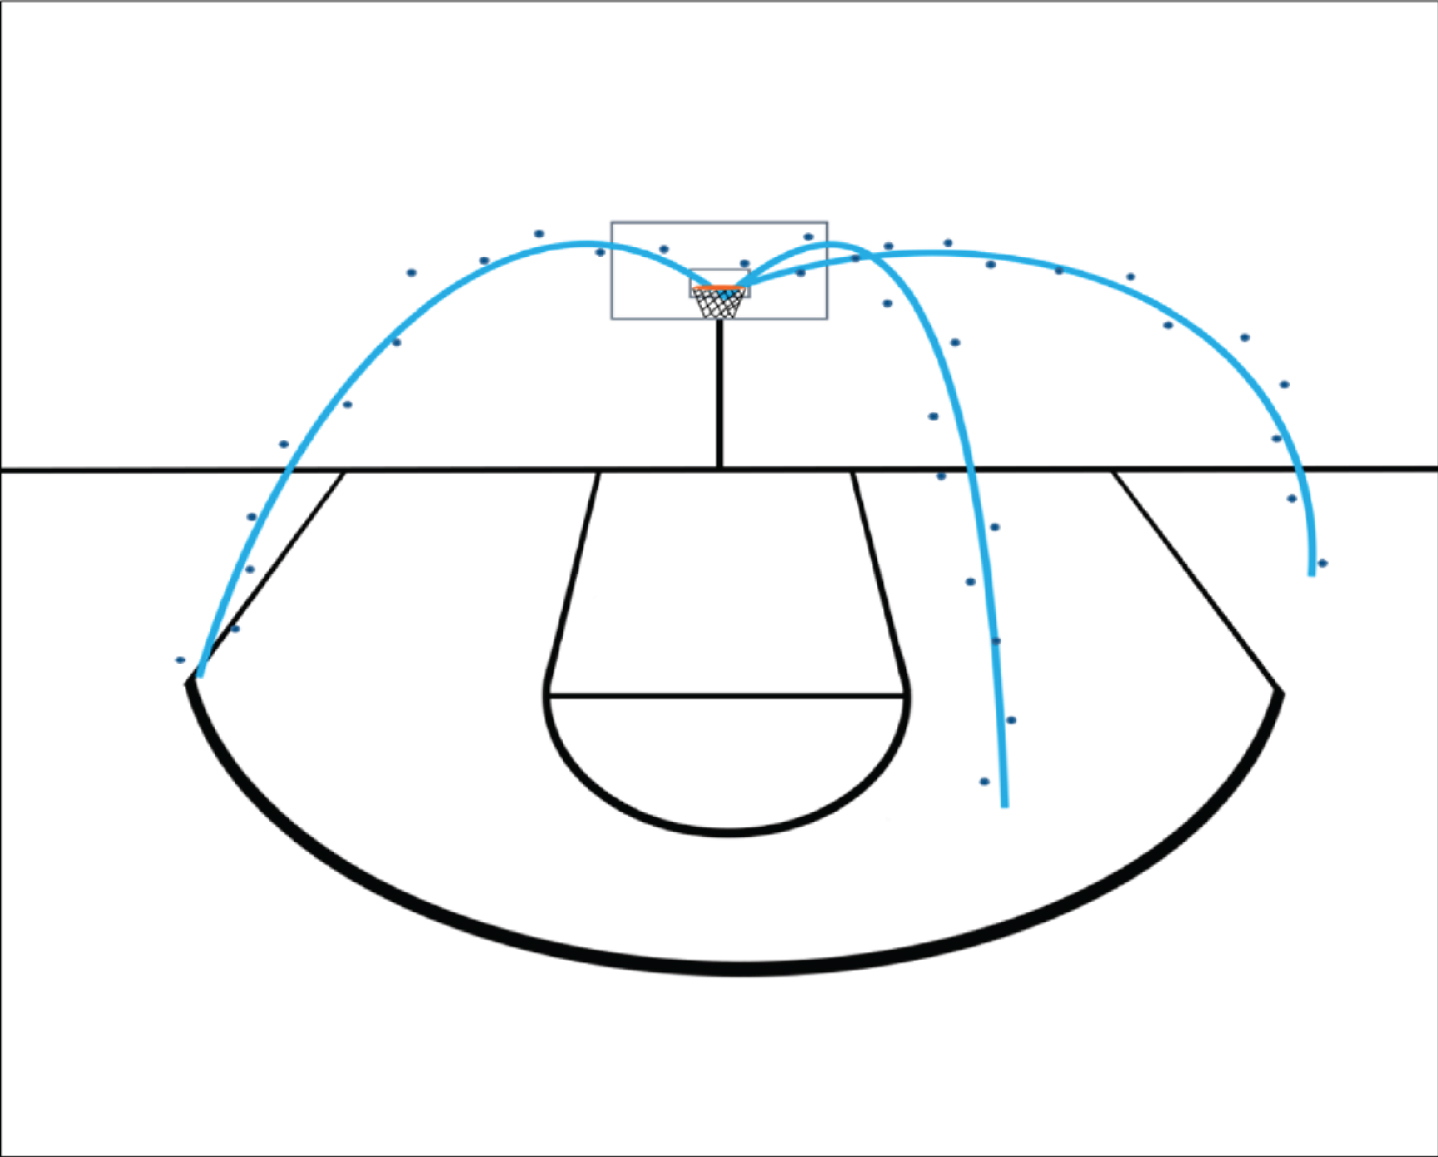 A graphical depiction of the shot trajectories from the SportVu database. The points represent data from the optical tracking database, while the smooth lines represent our modeled best-fit lines estimated using the Bayesian regression model (1).